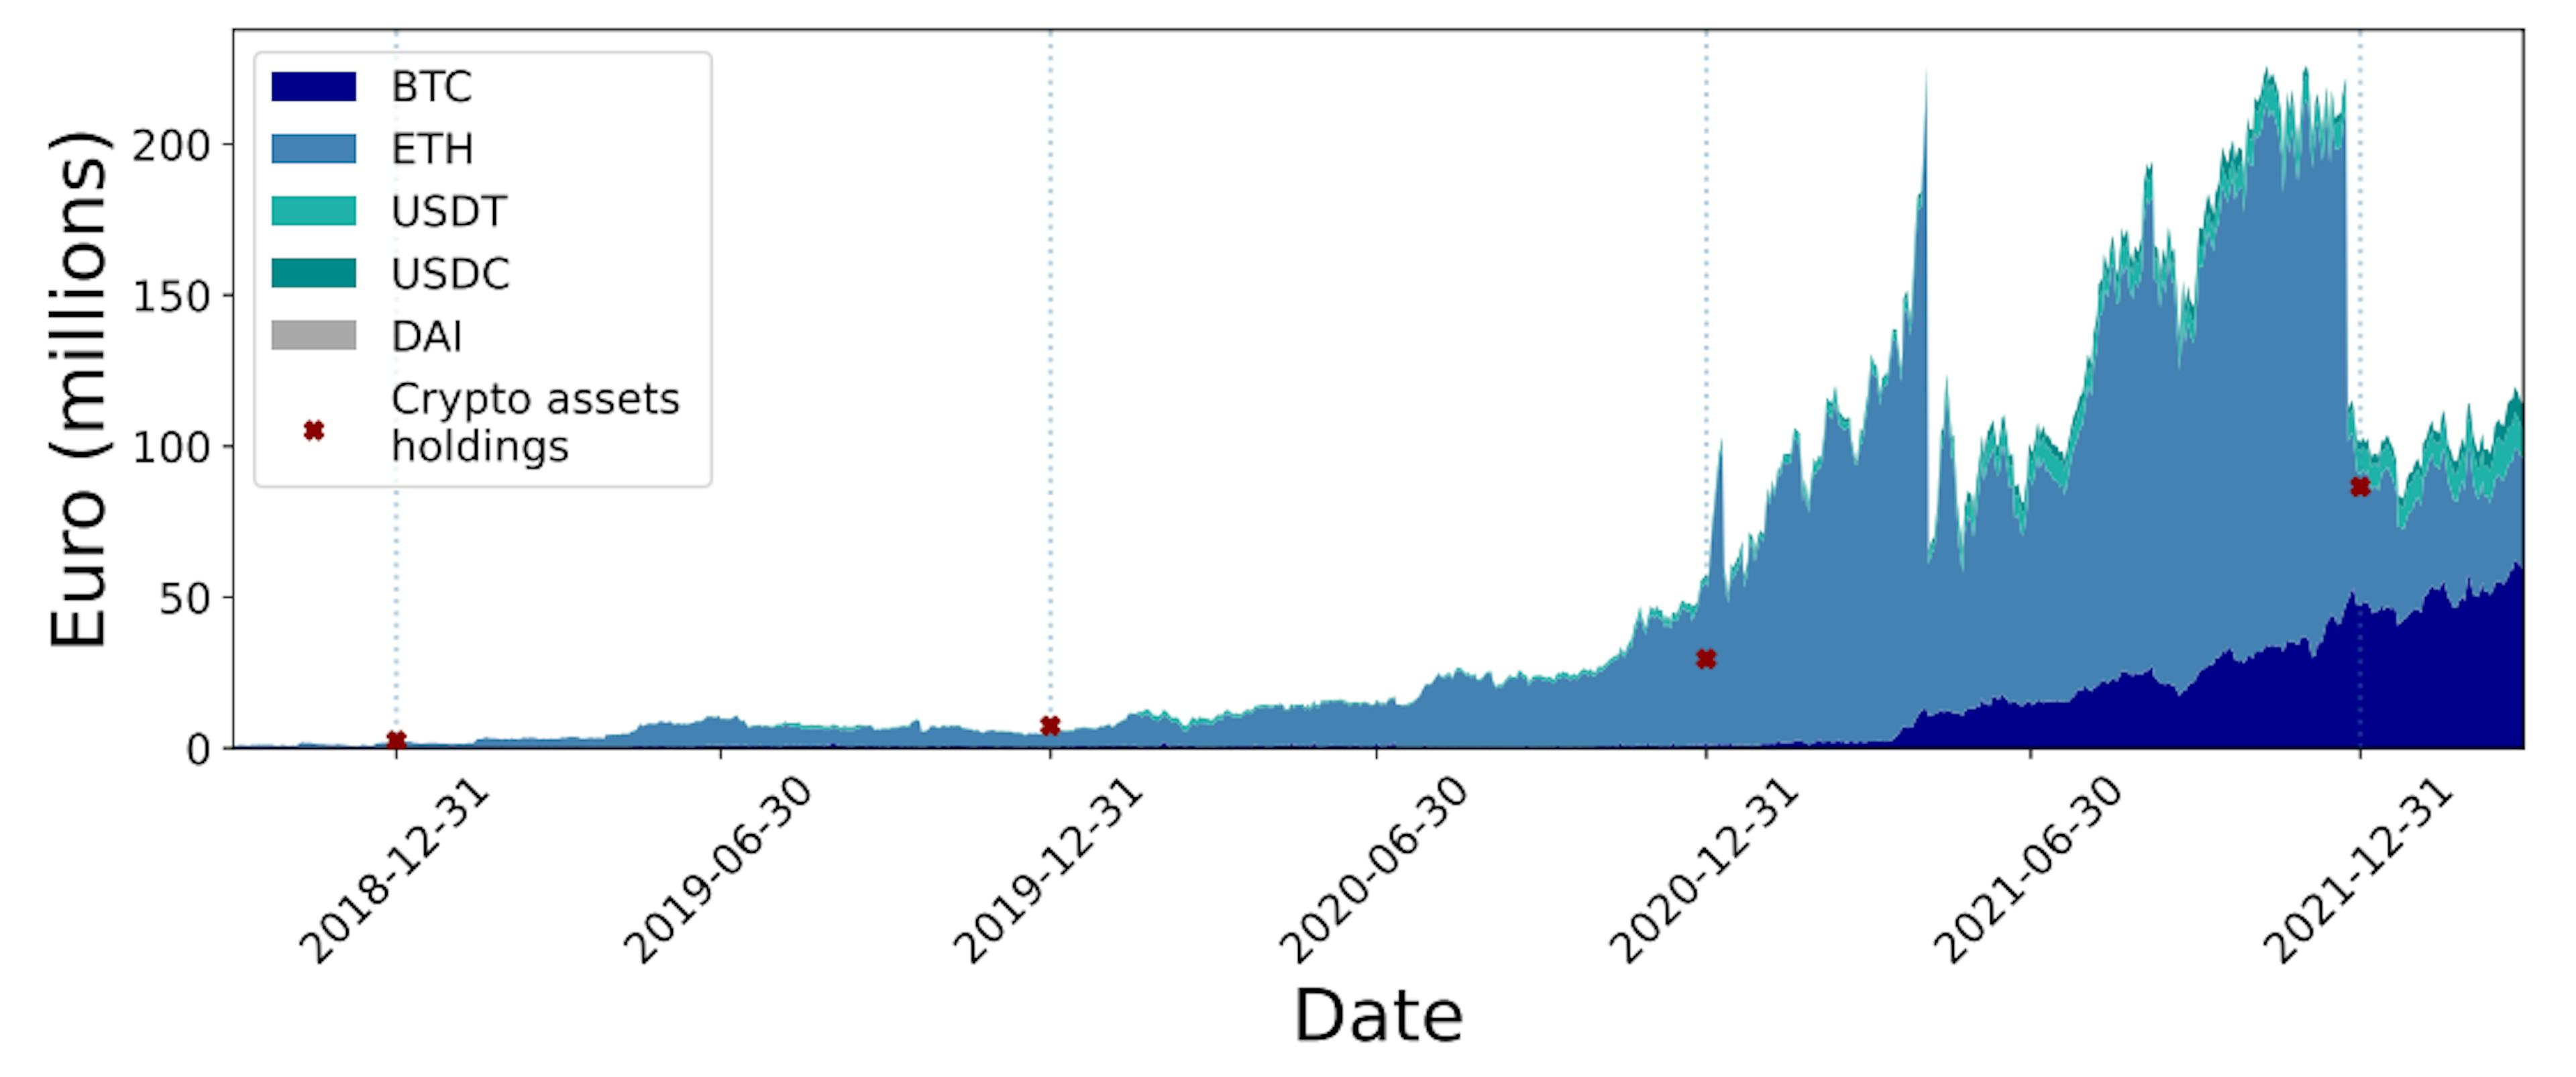 Figure 6: Estimation of the cryptoasset holdings of VASP-2. Colors correspond to different cryptoassets: bitcoin in dark blue, ether in light blue, USDC in dark green, USDT in light green, and DAI in gray. Red markers indicate the cryptoasset holdings declared in the balance sheet data at the end of each year for the period 2018 to 2021.